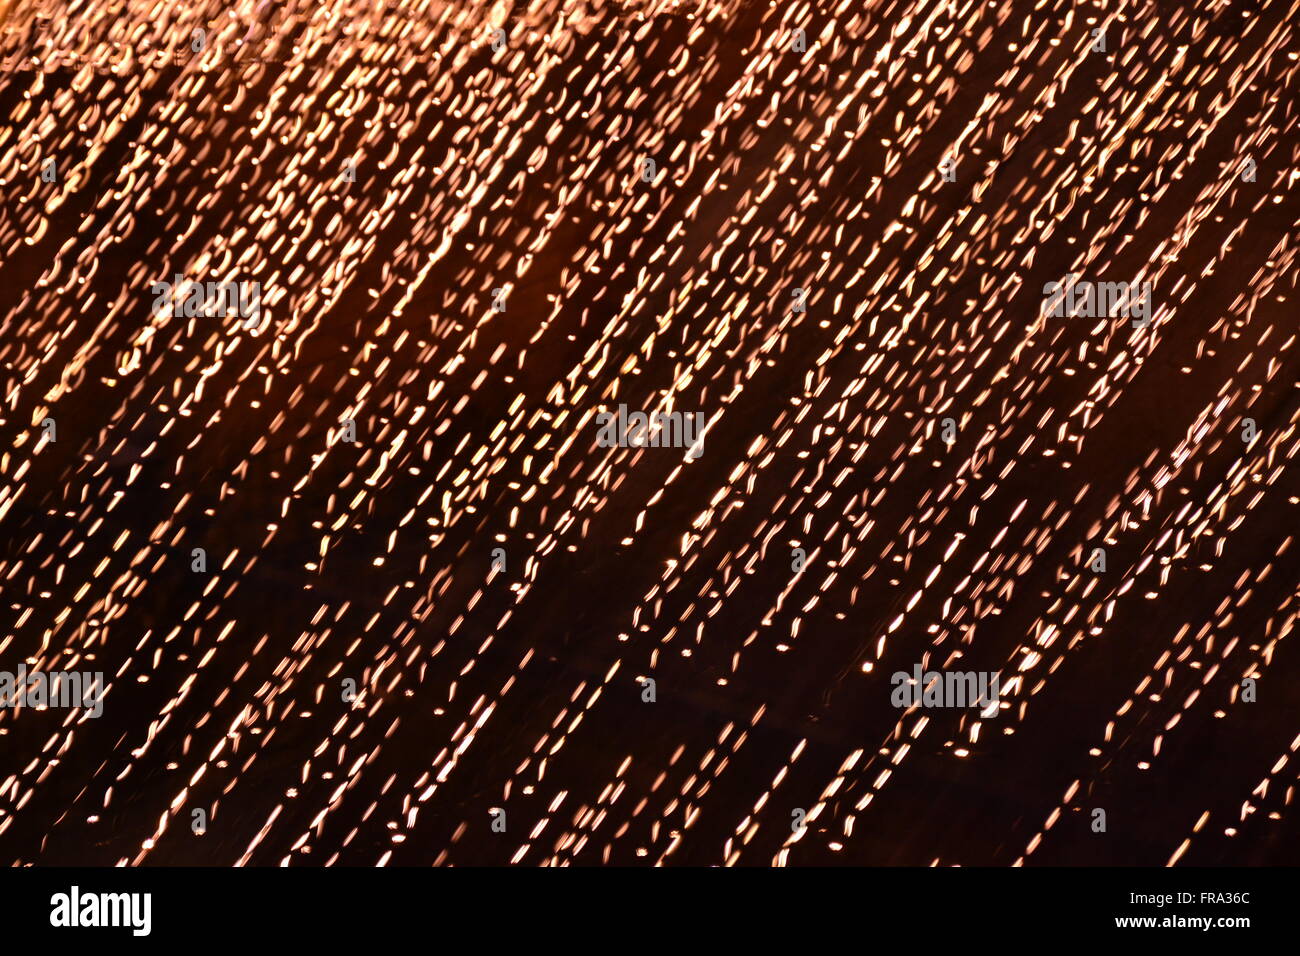 Falling golden sparks abstract background Stock Photo